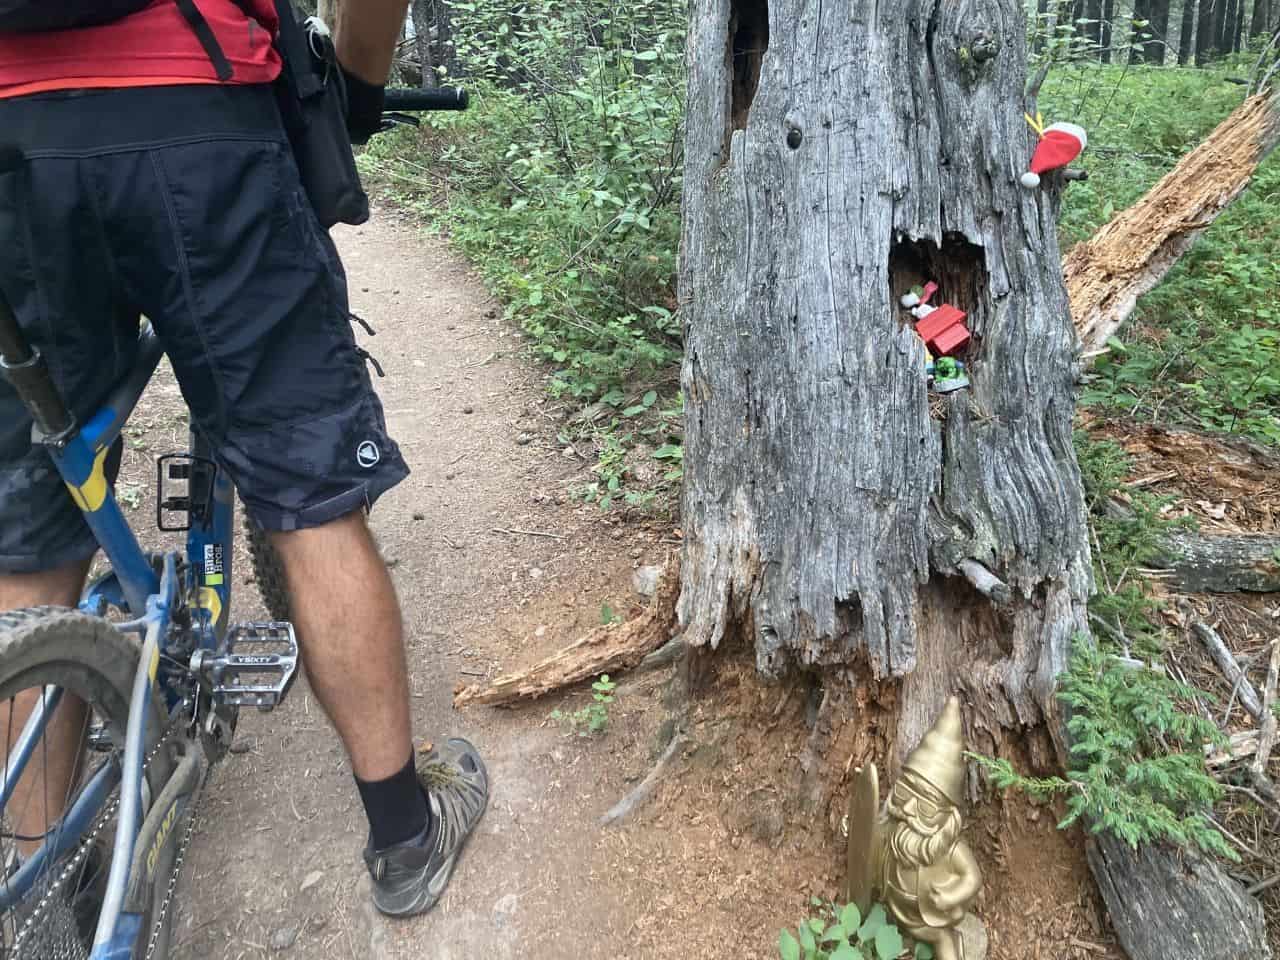 Man standing over mountain bike next to stump with plastic figurines tucked inside.